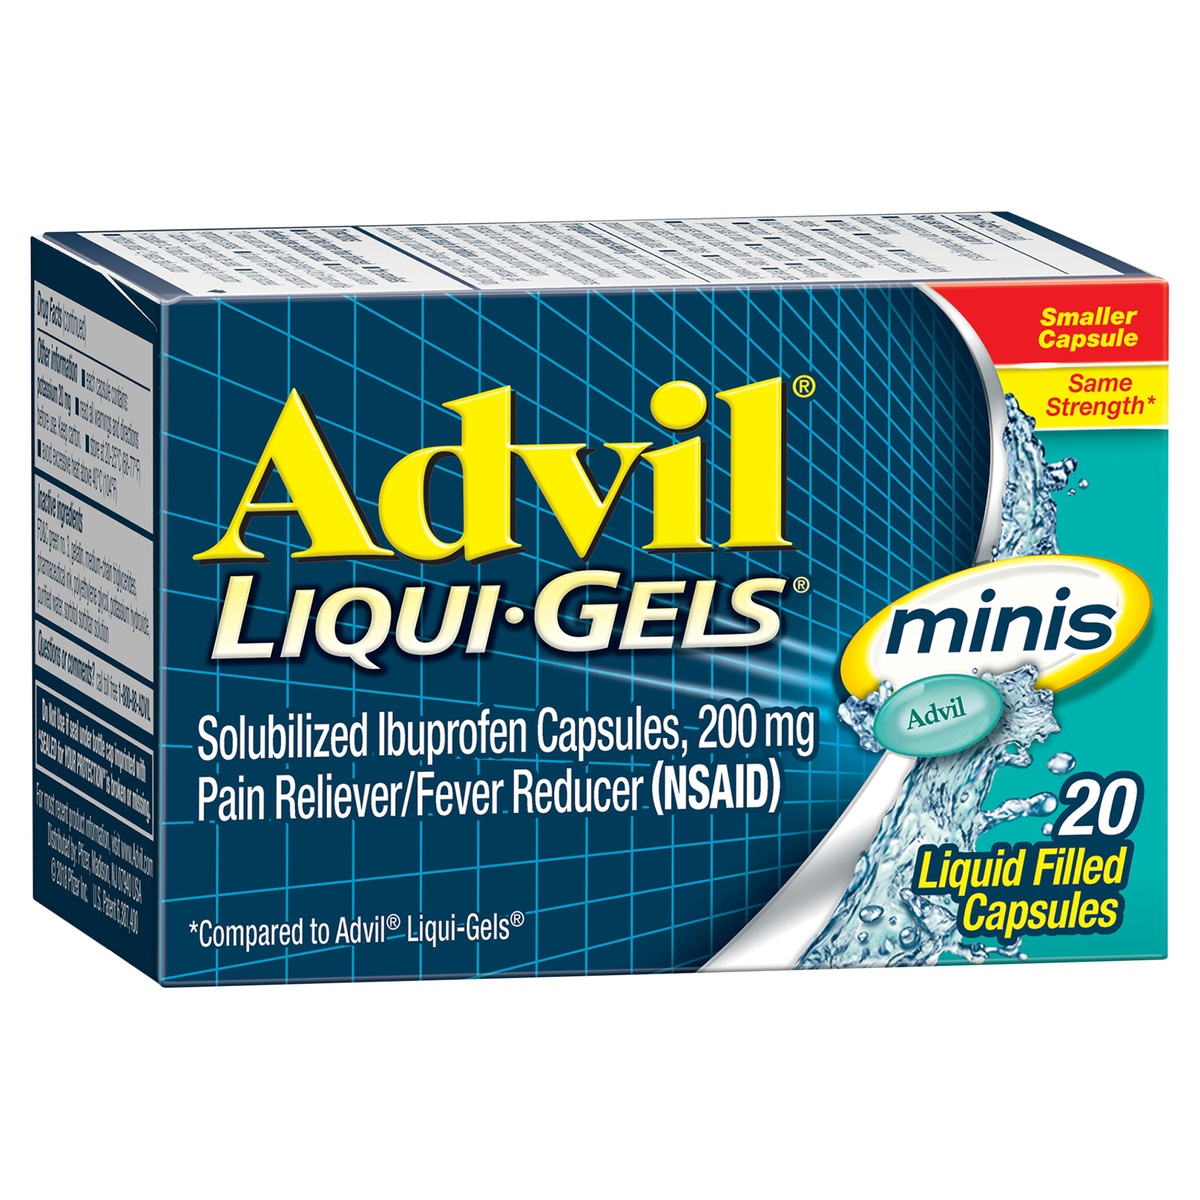 slide 2 of 10, Advil Liqui-Gels minis Pain Reliever and Fever Reducer, Ibuprofen 200mg for Pain Relief - 20 Liquid Filled Capsules, 20 ct